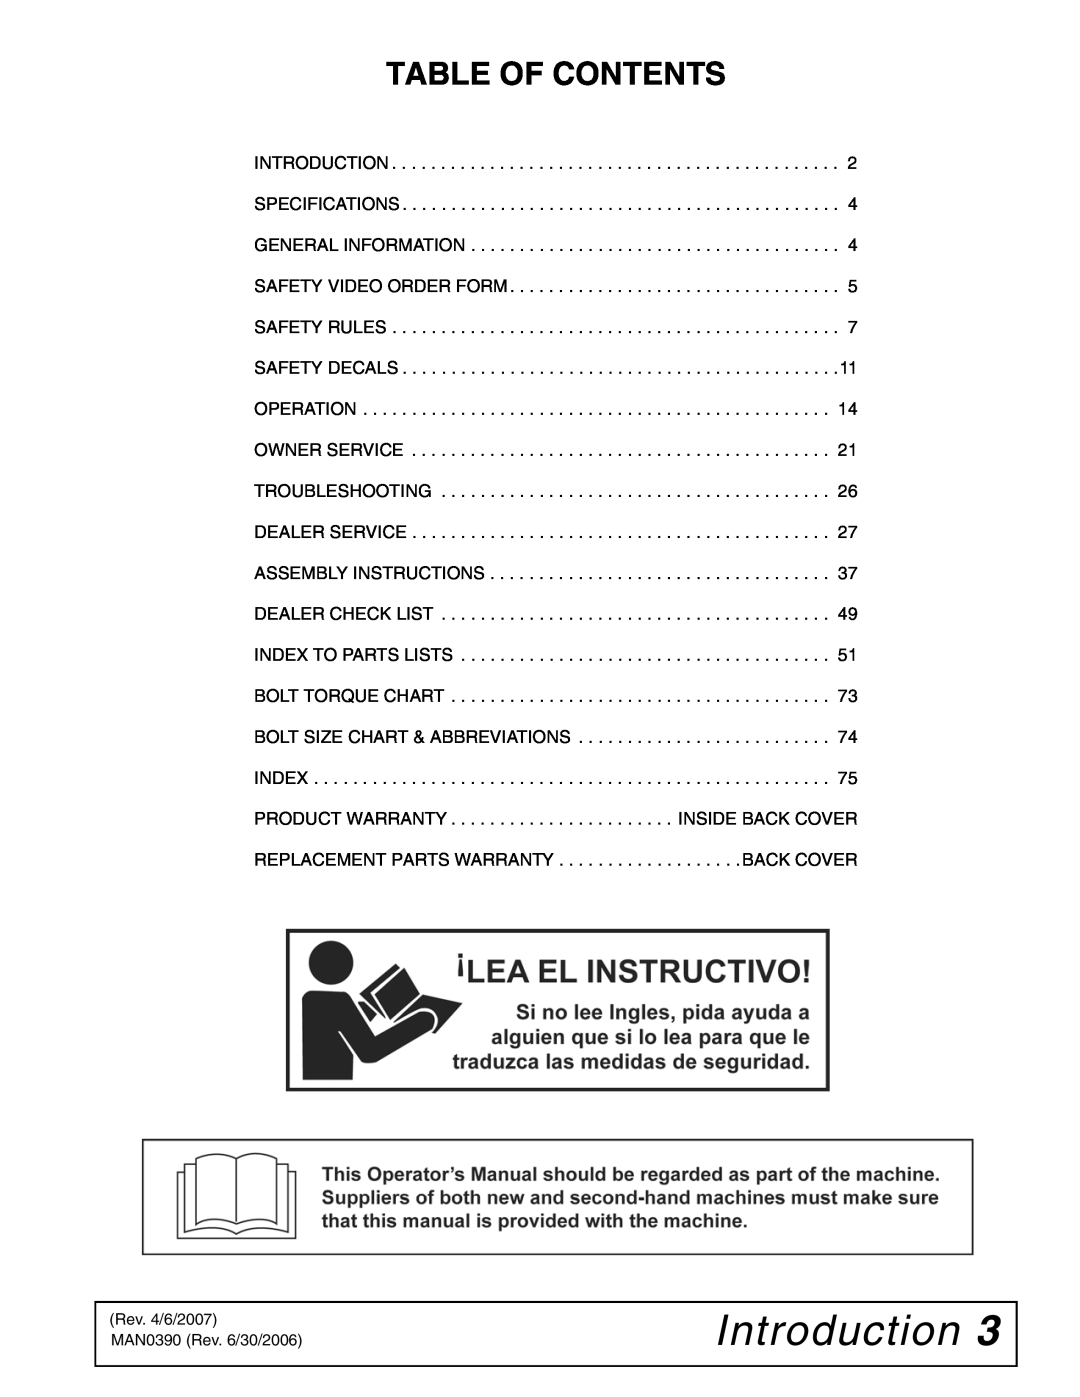 Woods Equipment DS120, DS96 manual Introduction, Table Of Contents 